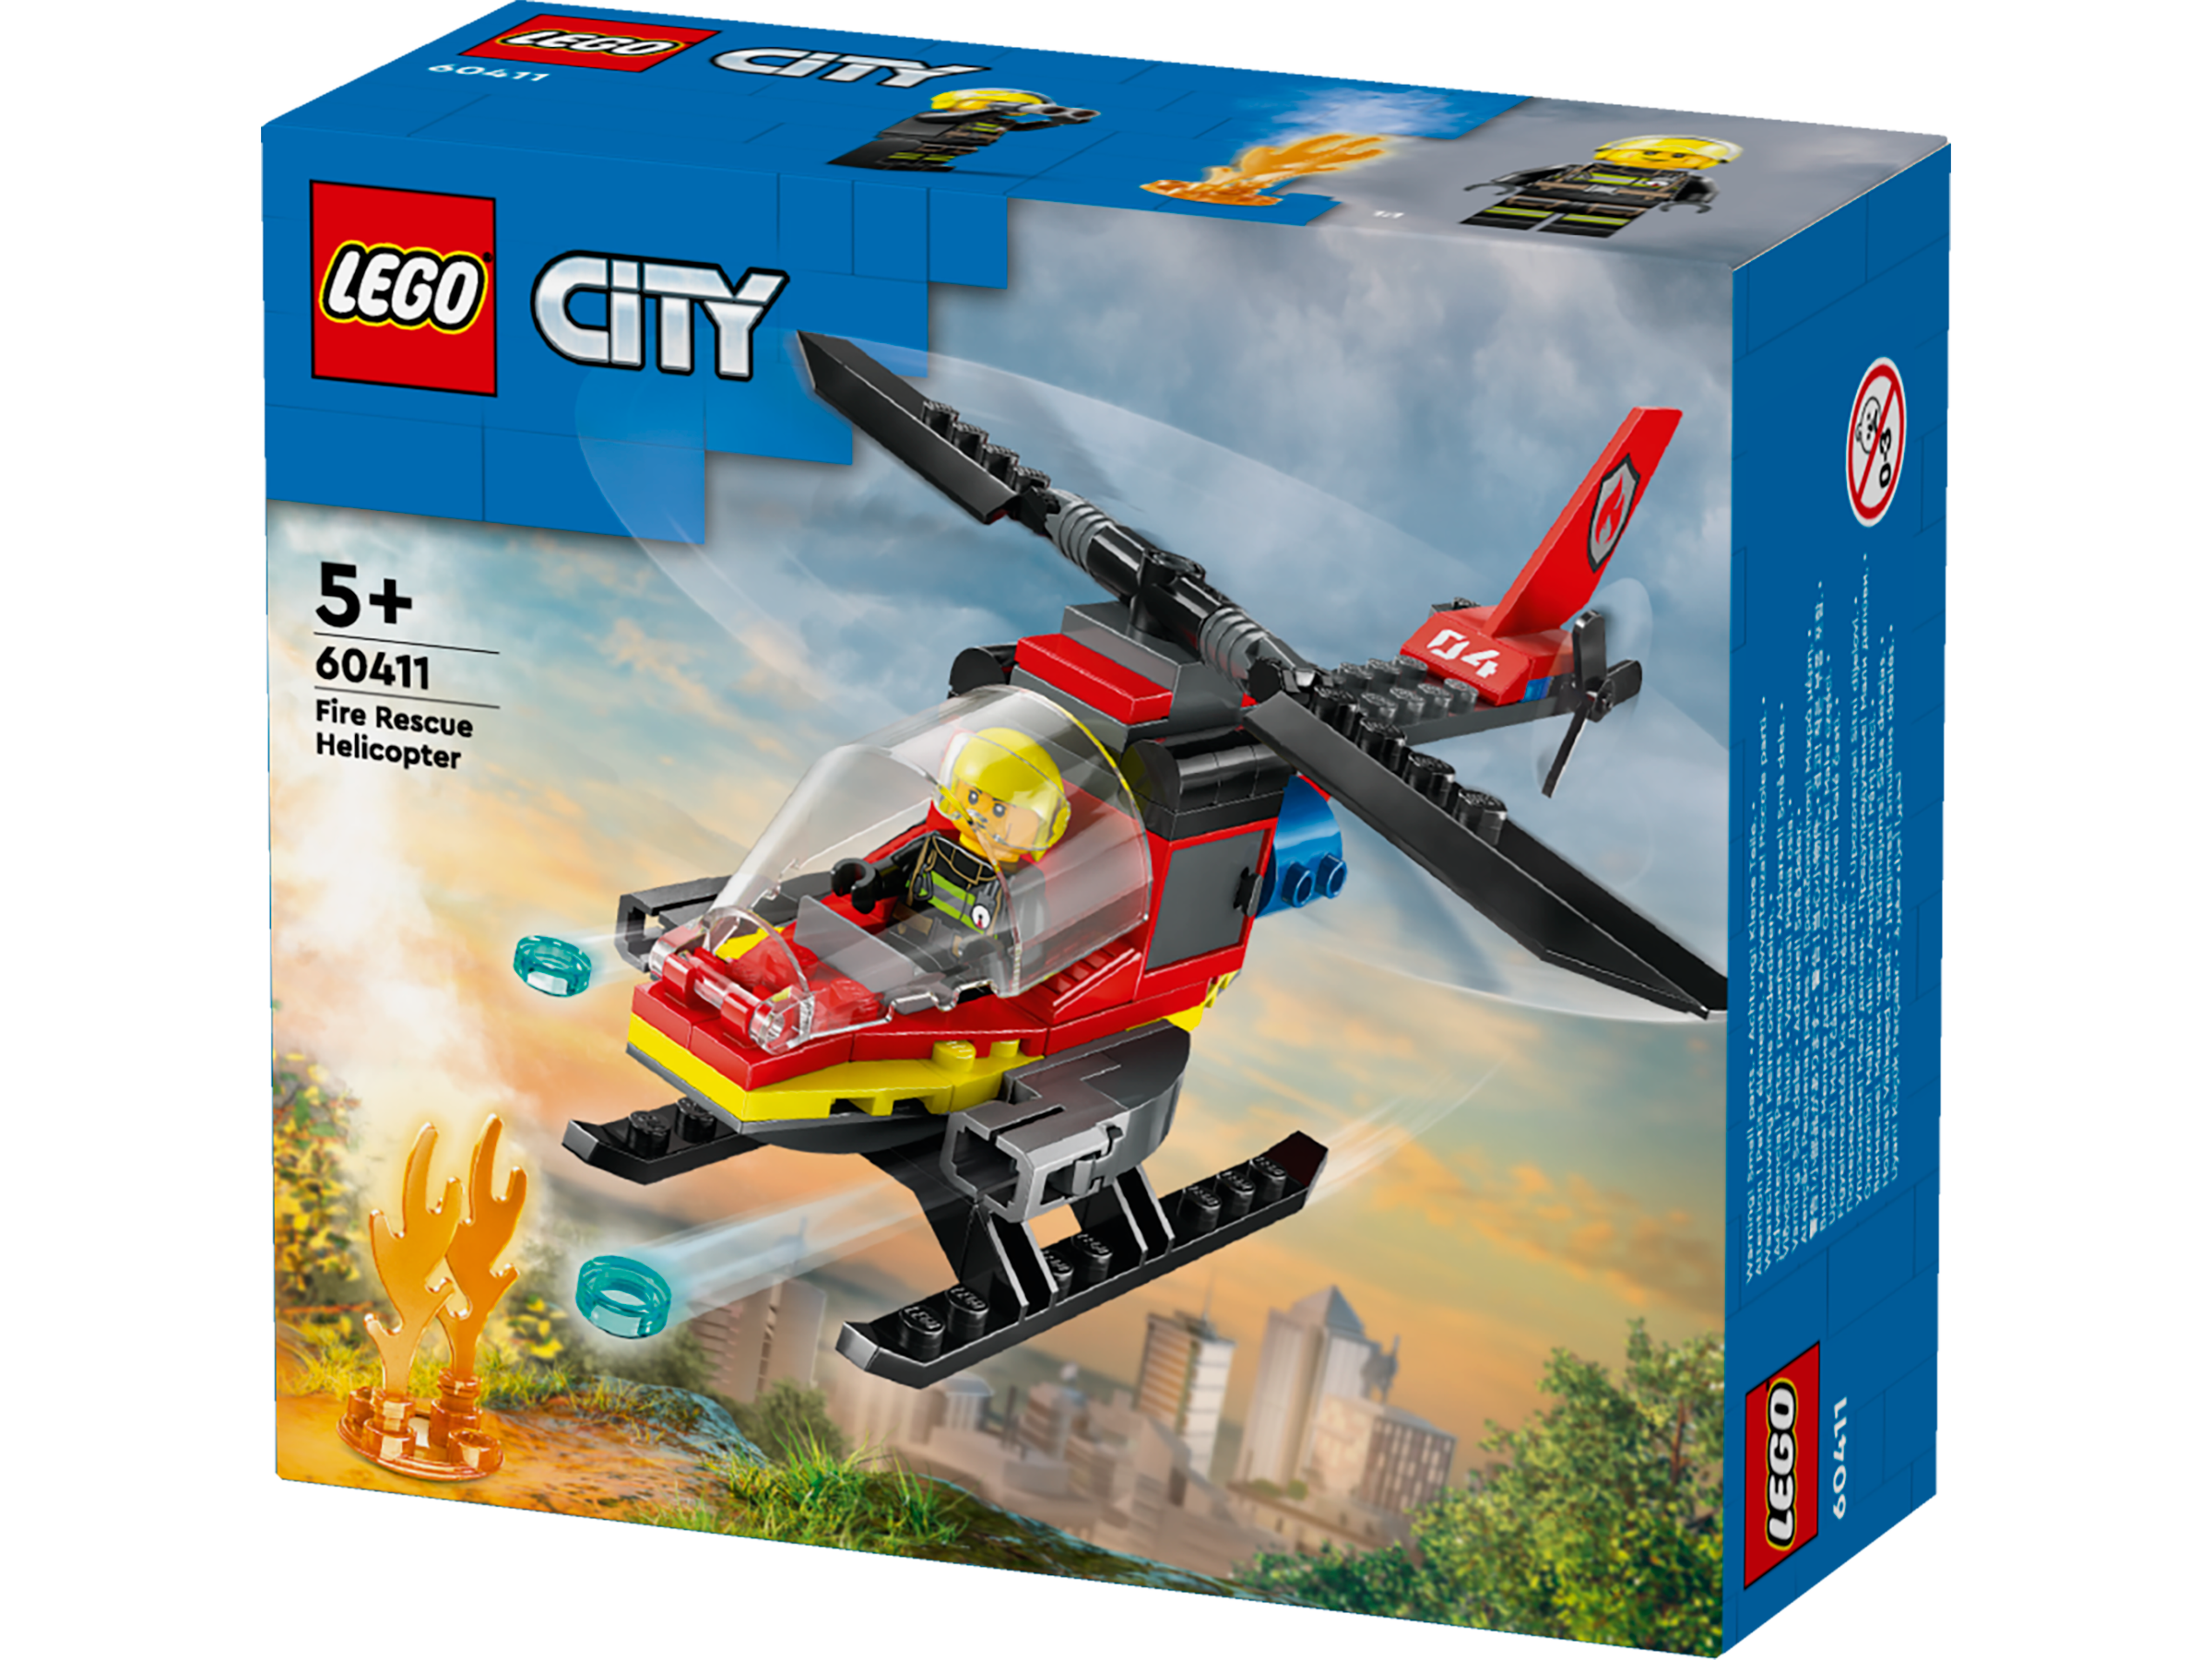 Lego 60411 Fire Rescue Helicopter